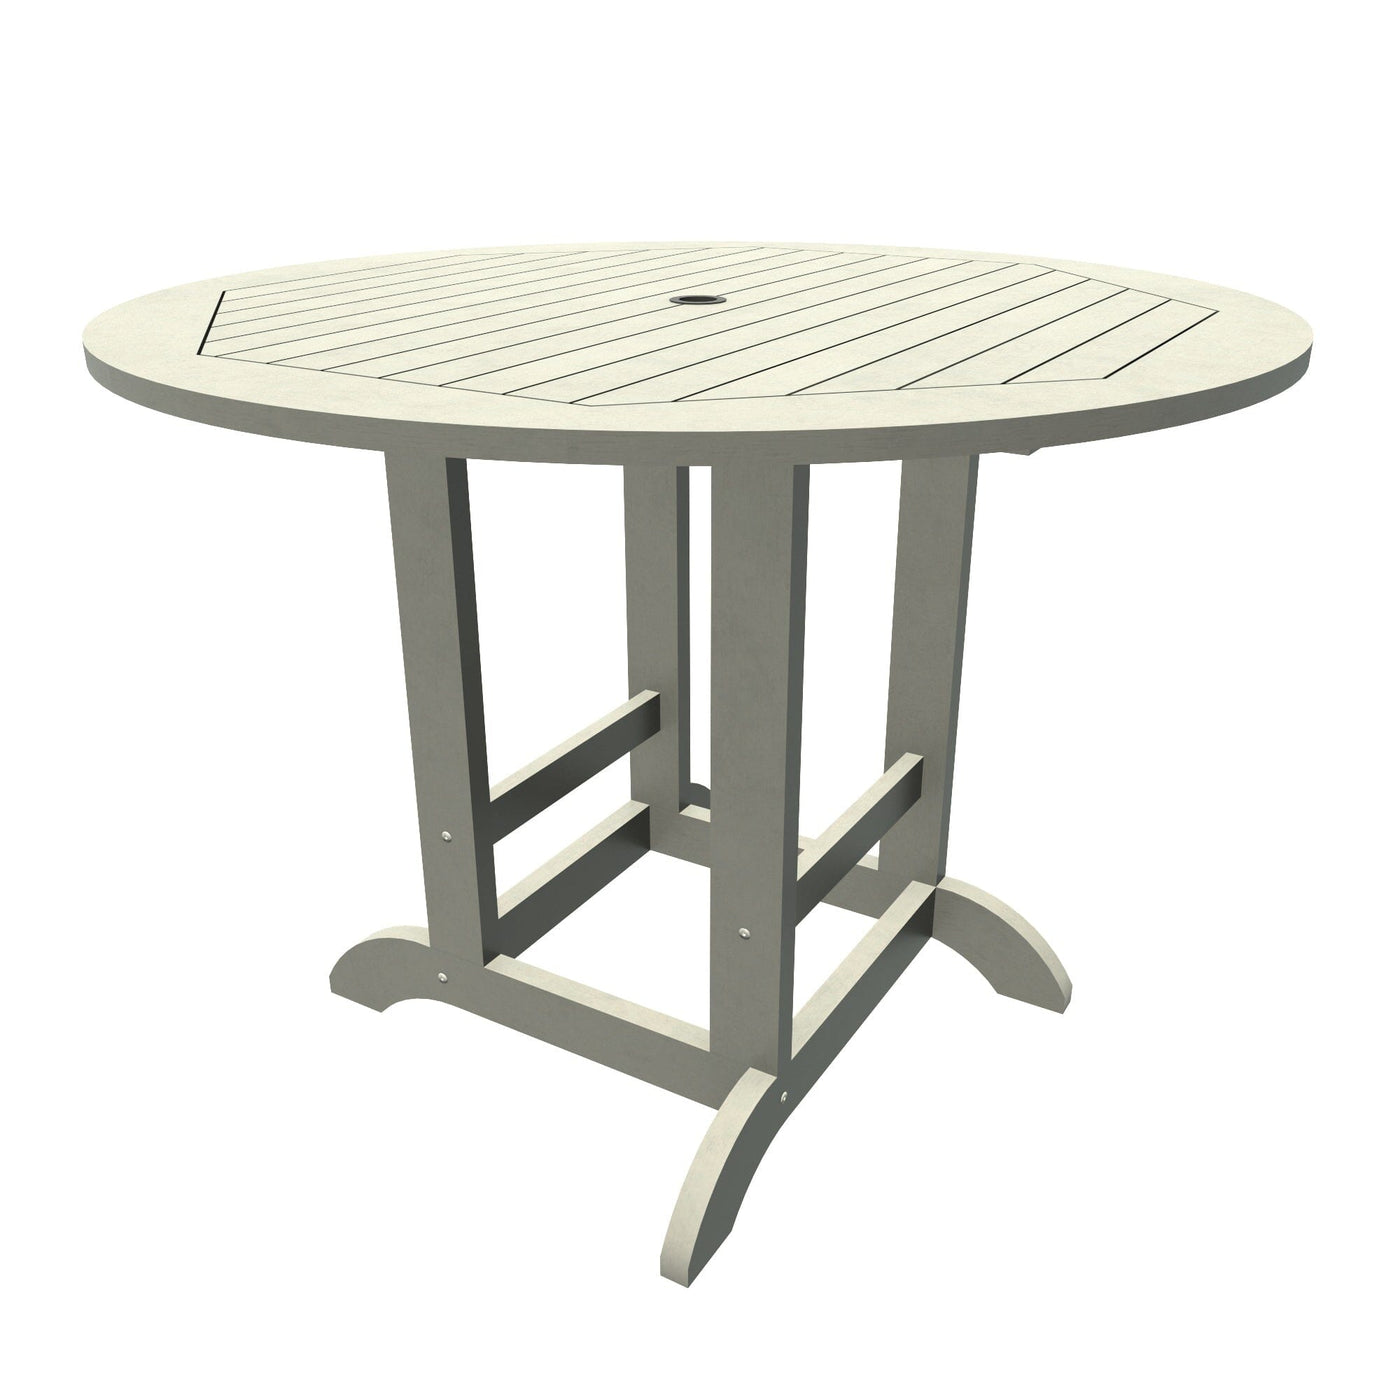 Round 48in Diameter Dining Table - Counter Height Dining Highwood USA Harbor Gray 